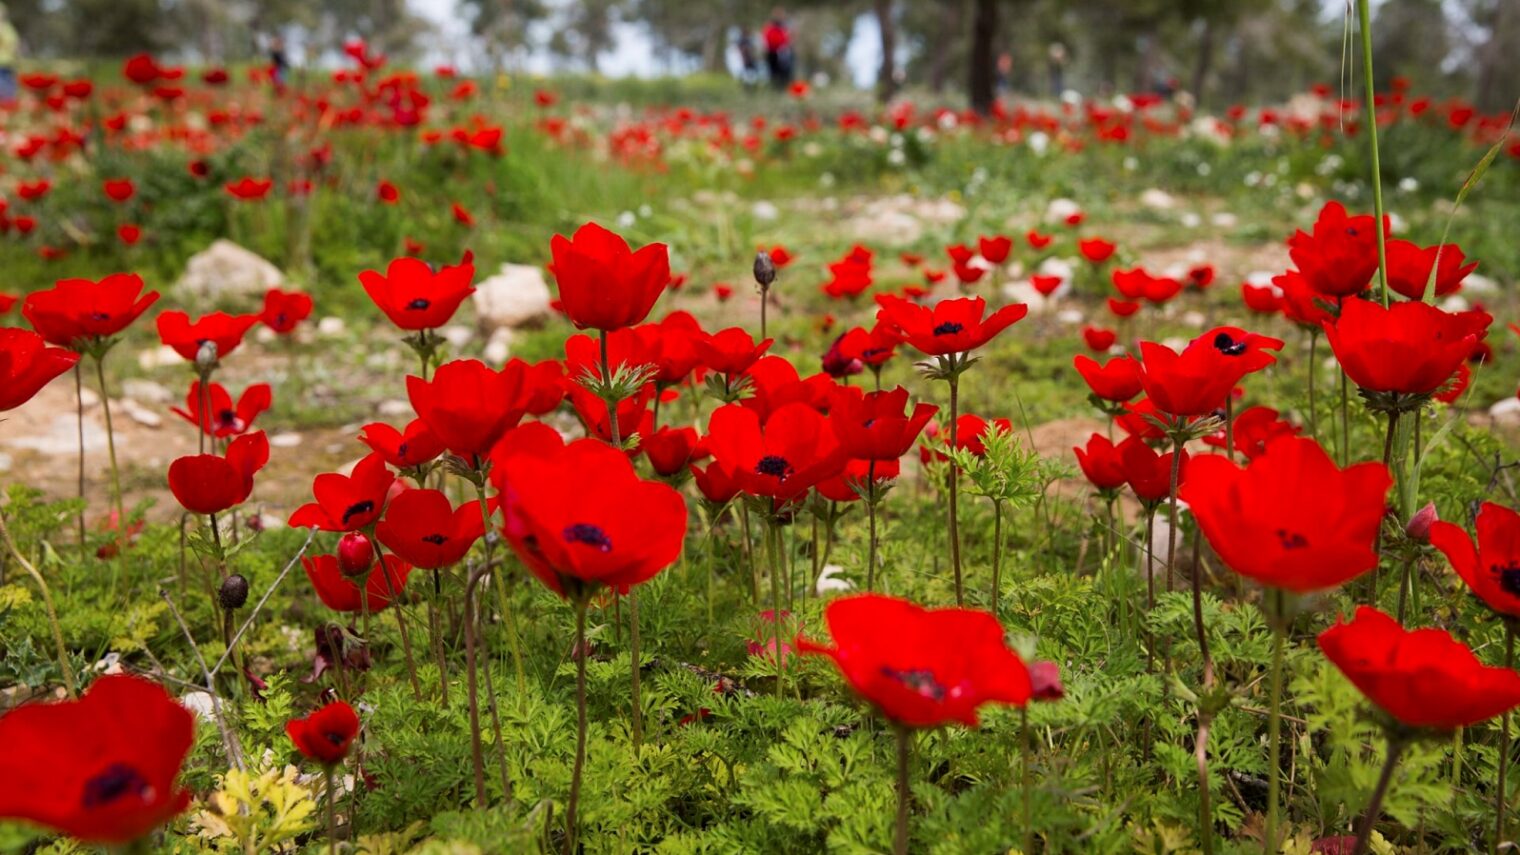 Anemones in southern Israel. Photo by Nati Shohat/Flash90